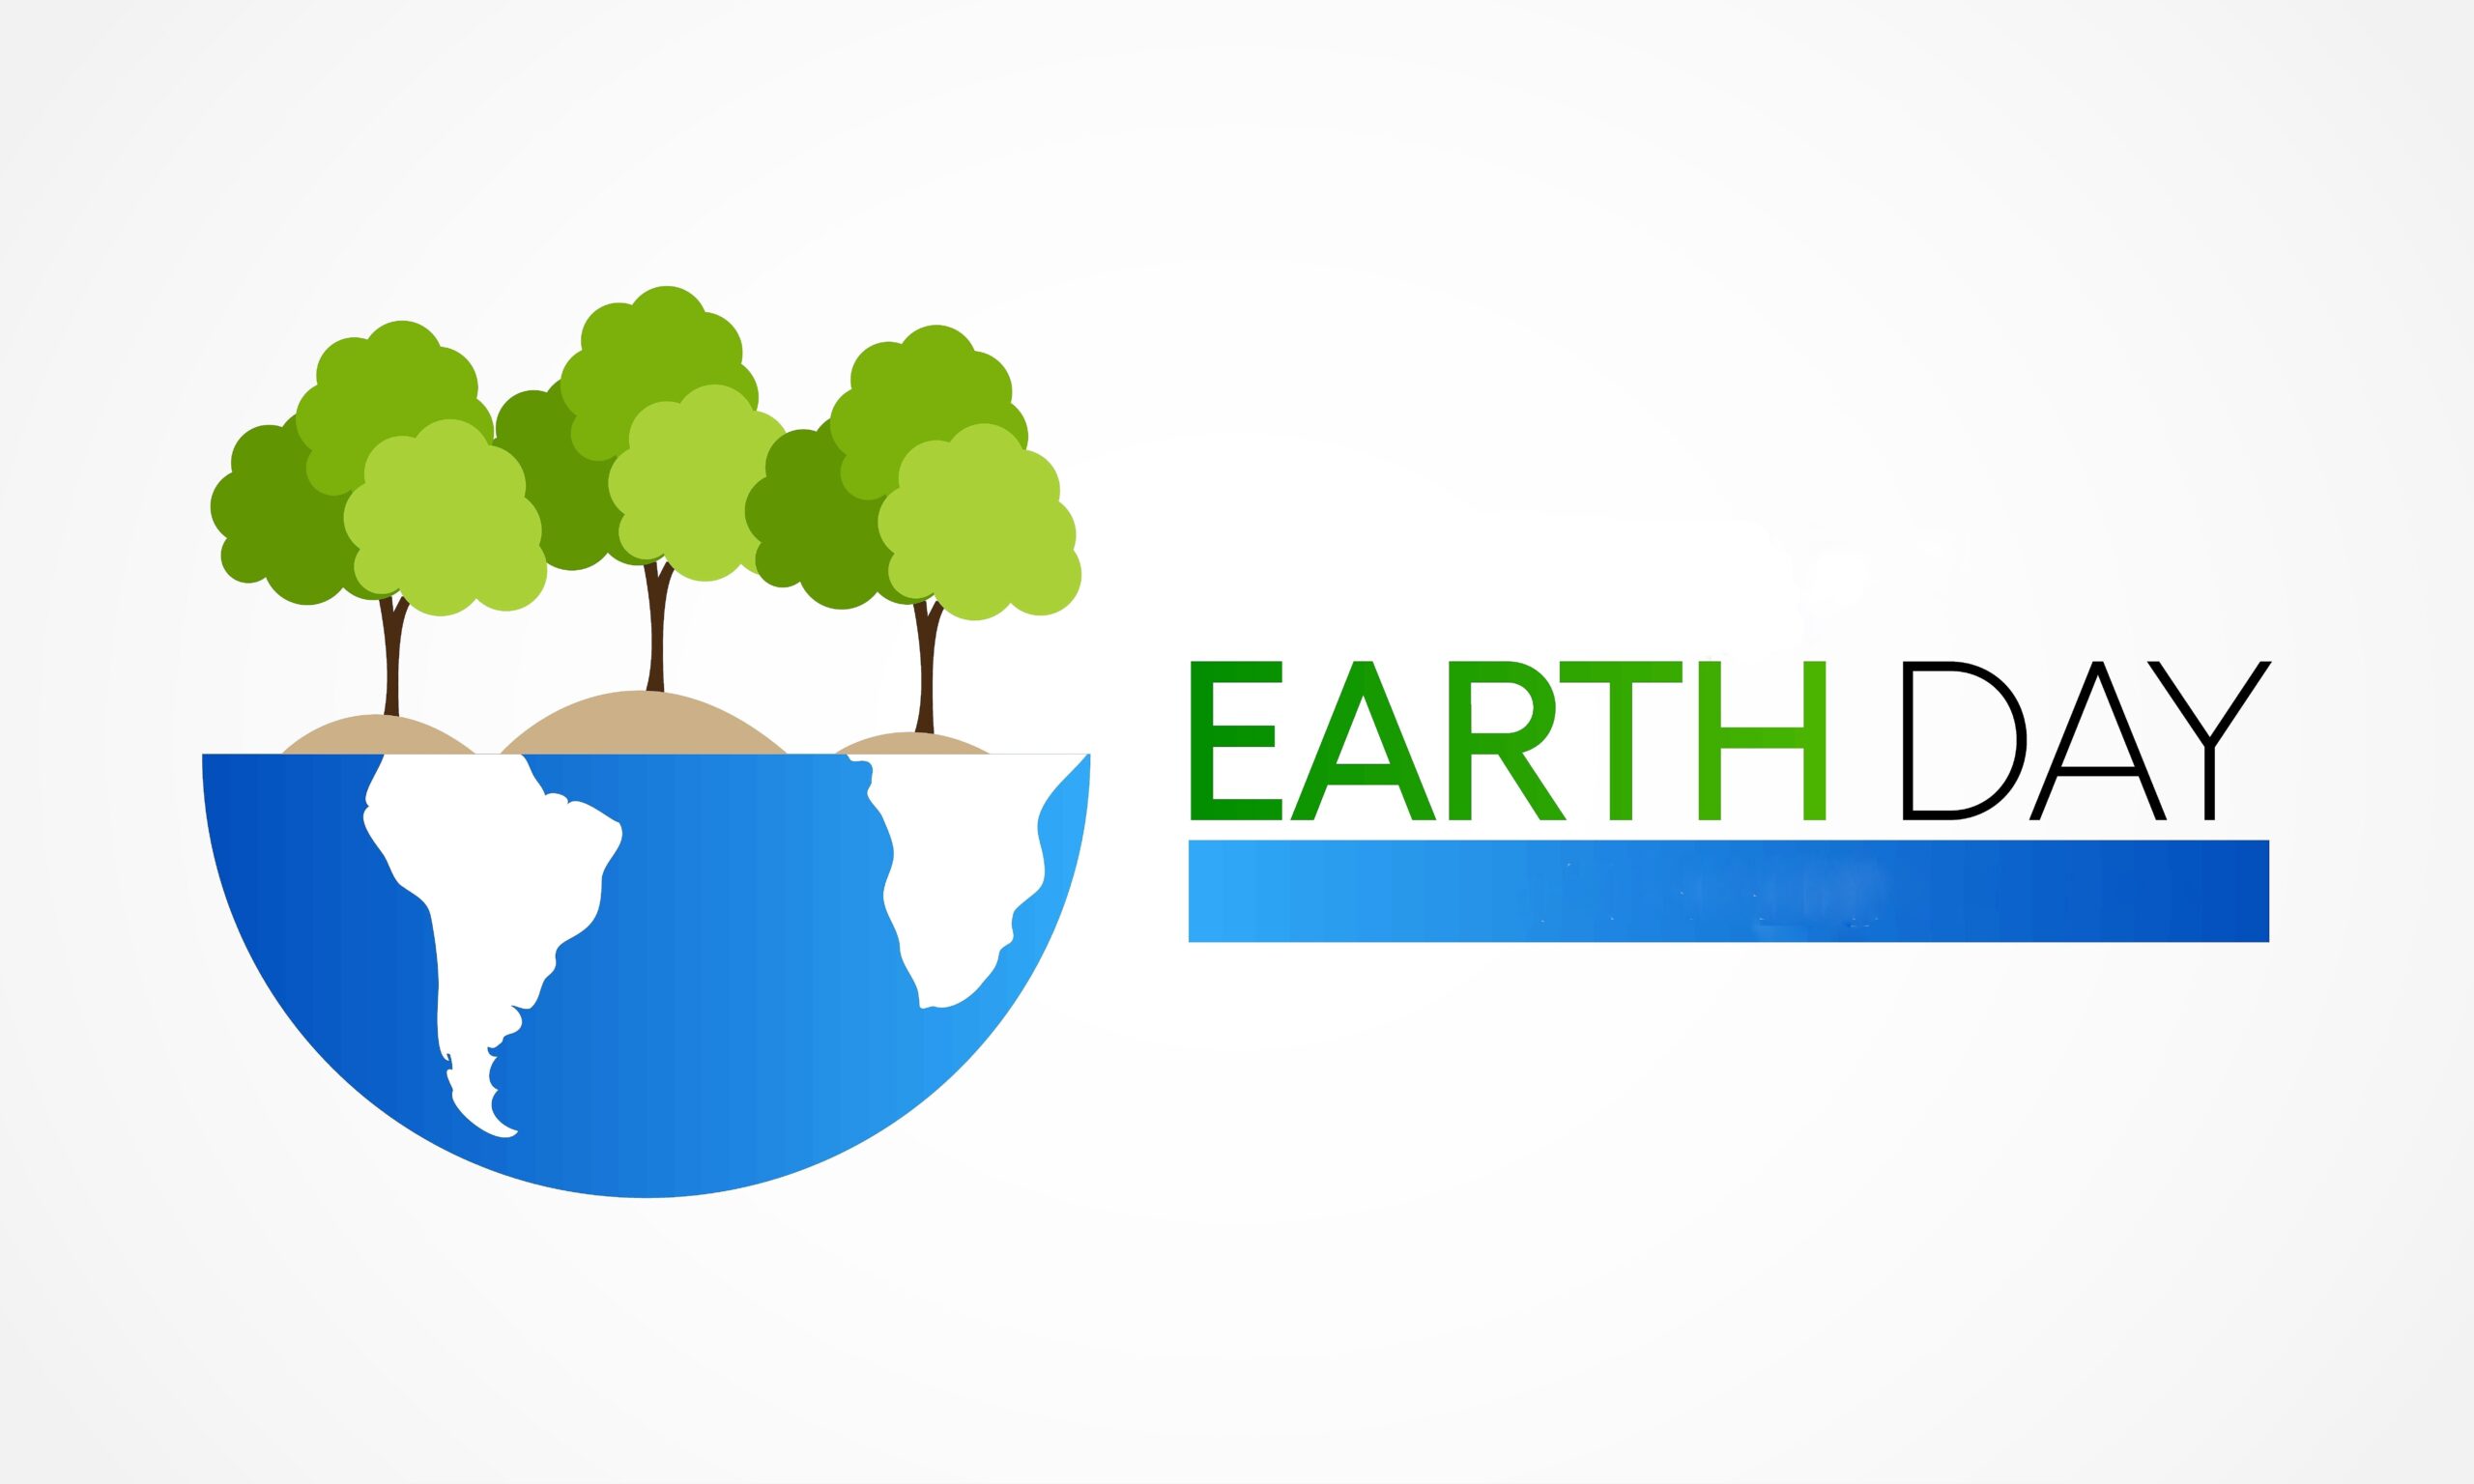 Earth Day Should be Every Day